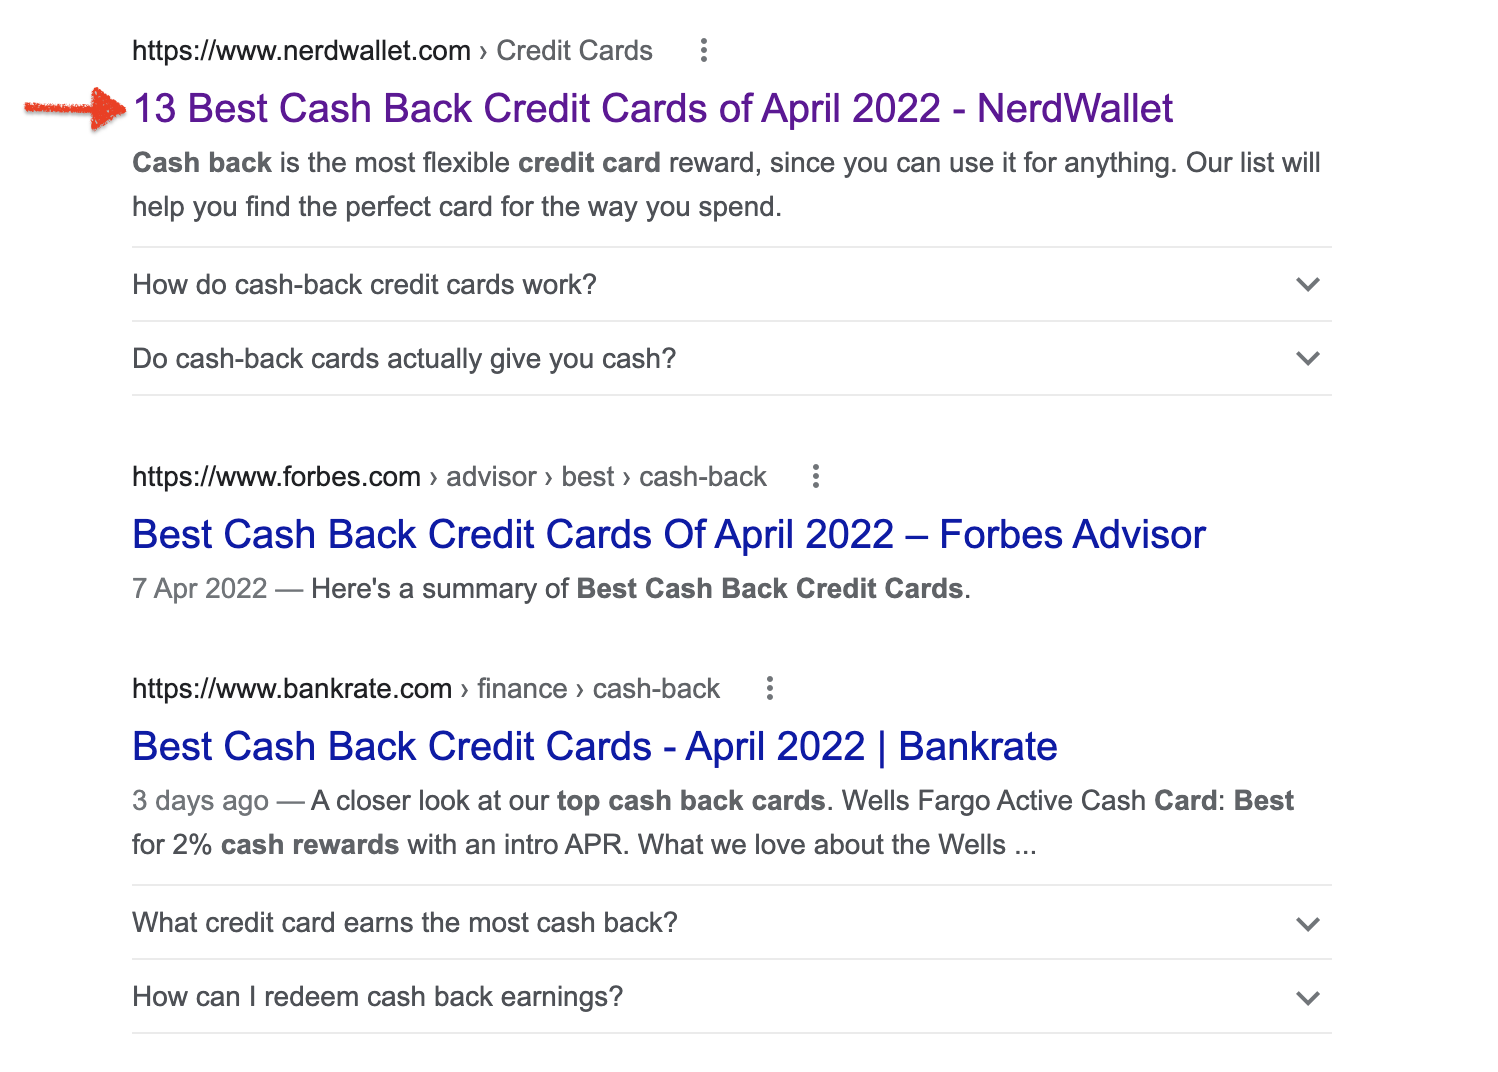 Search Engine Results Page for best cash back credit cards